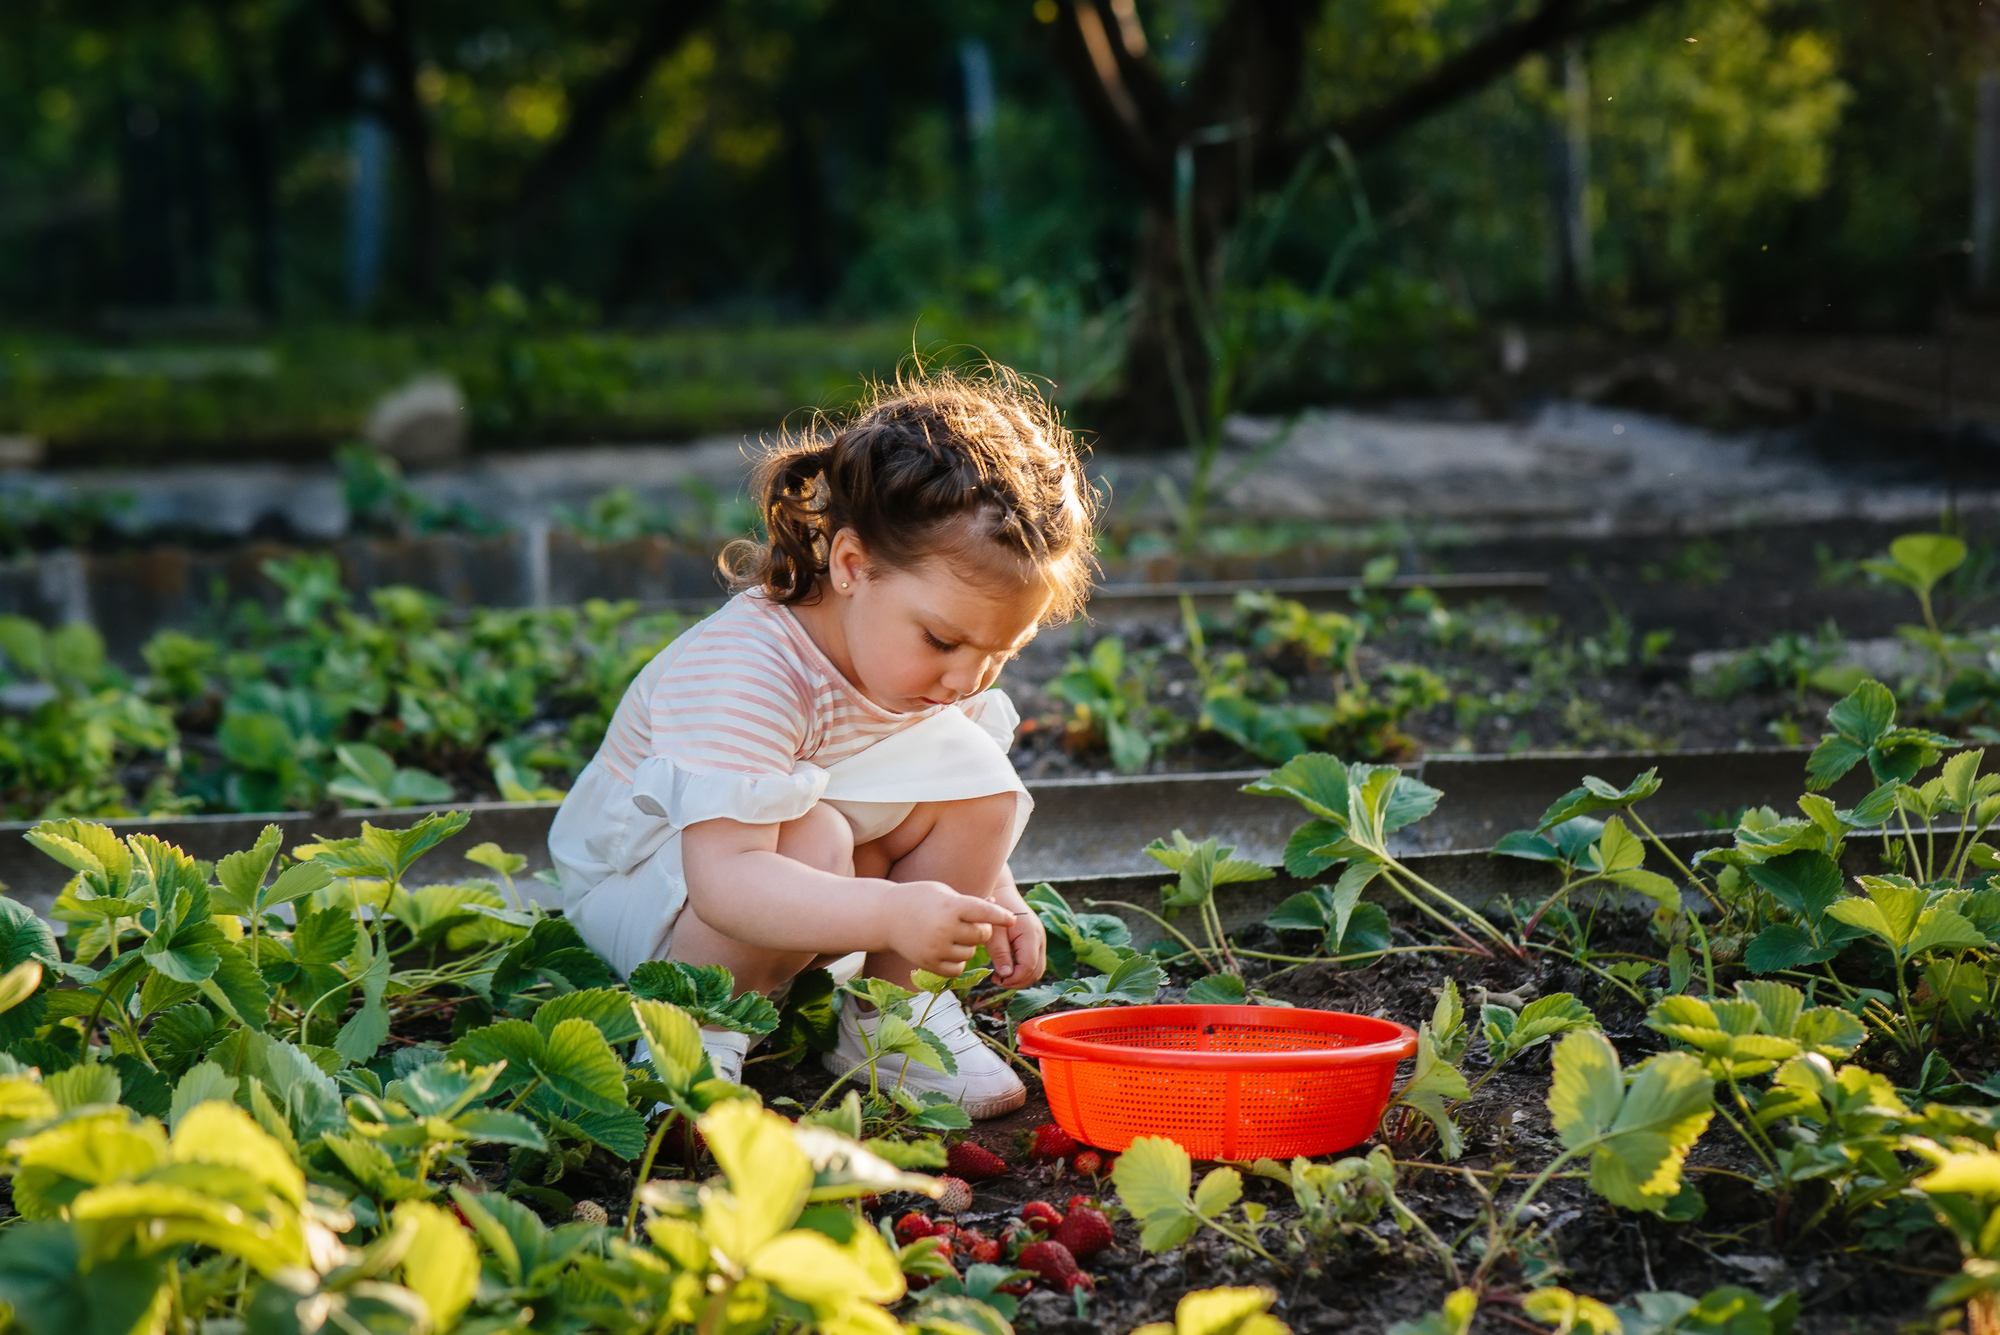 a young child crouches to collect strawberries in a summer garden